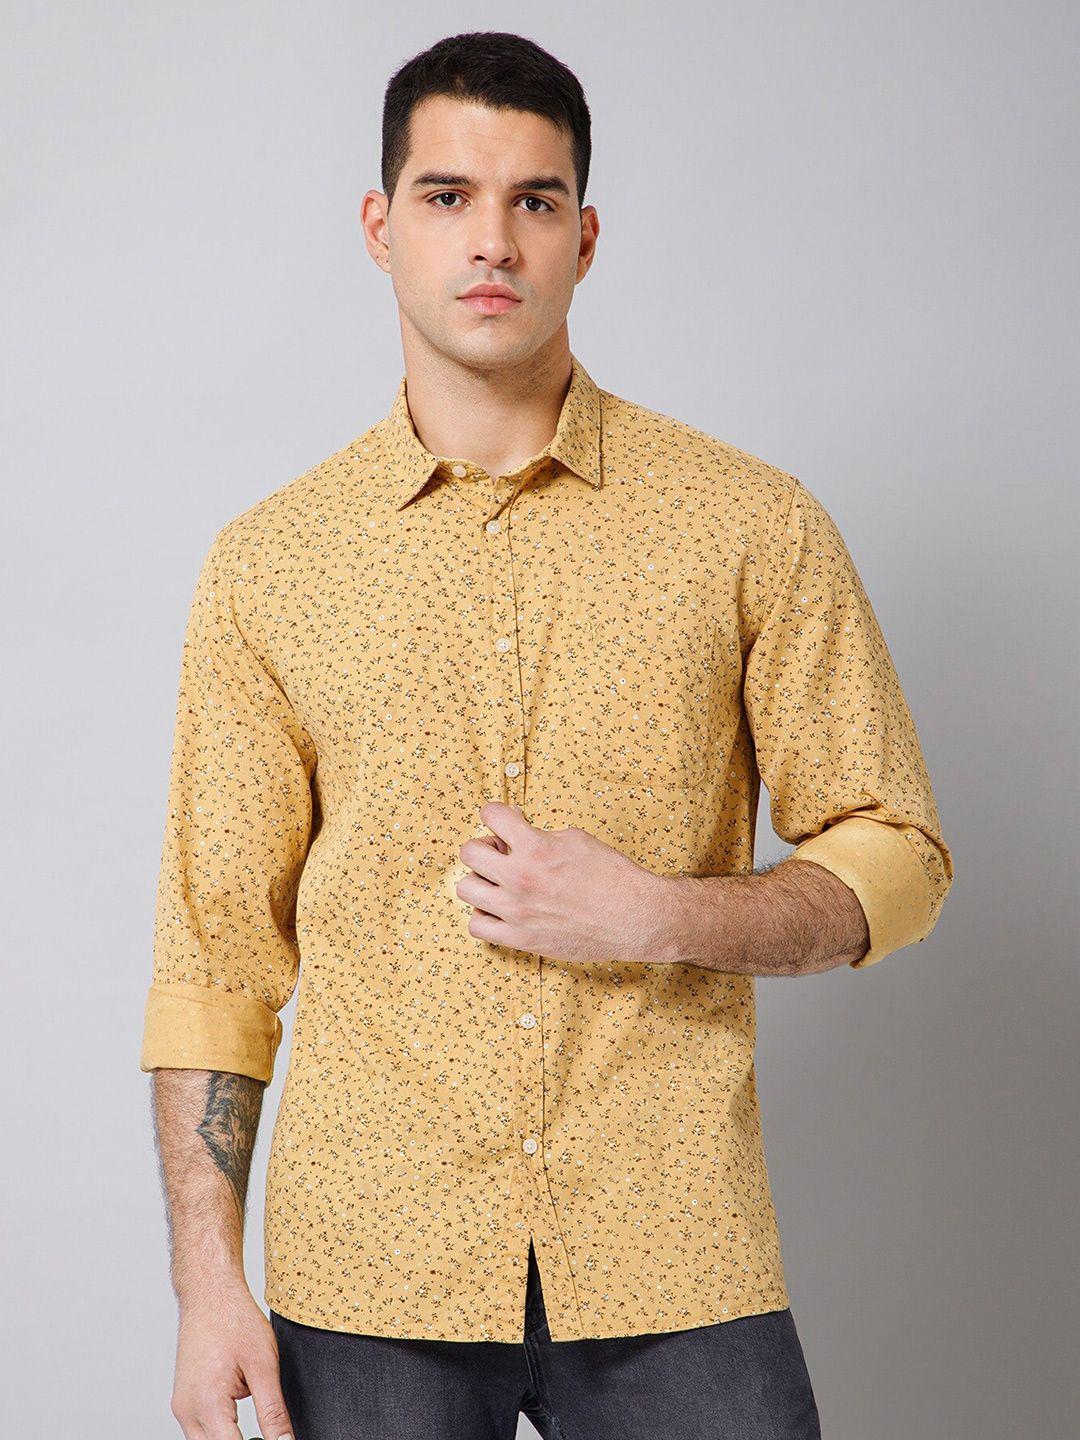 cantabil-comfort-floral-printed-spread-collar-cotton-casual-shirt